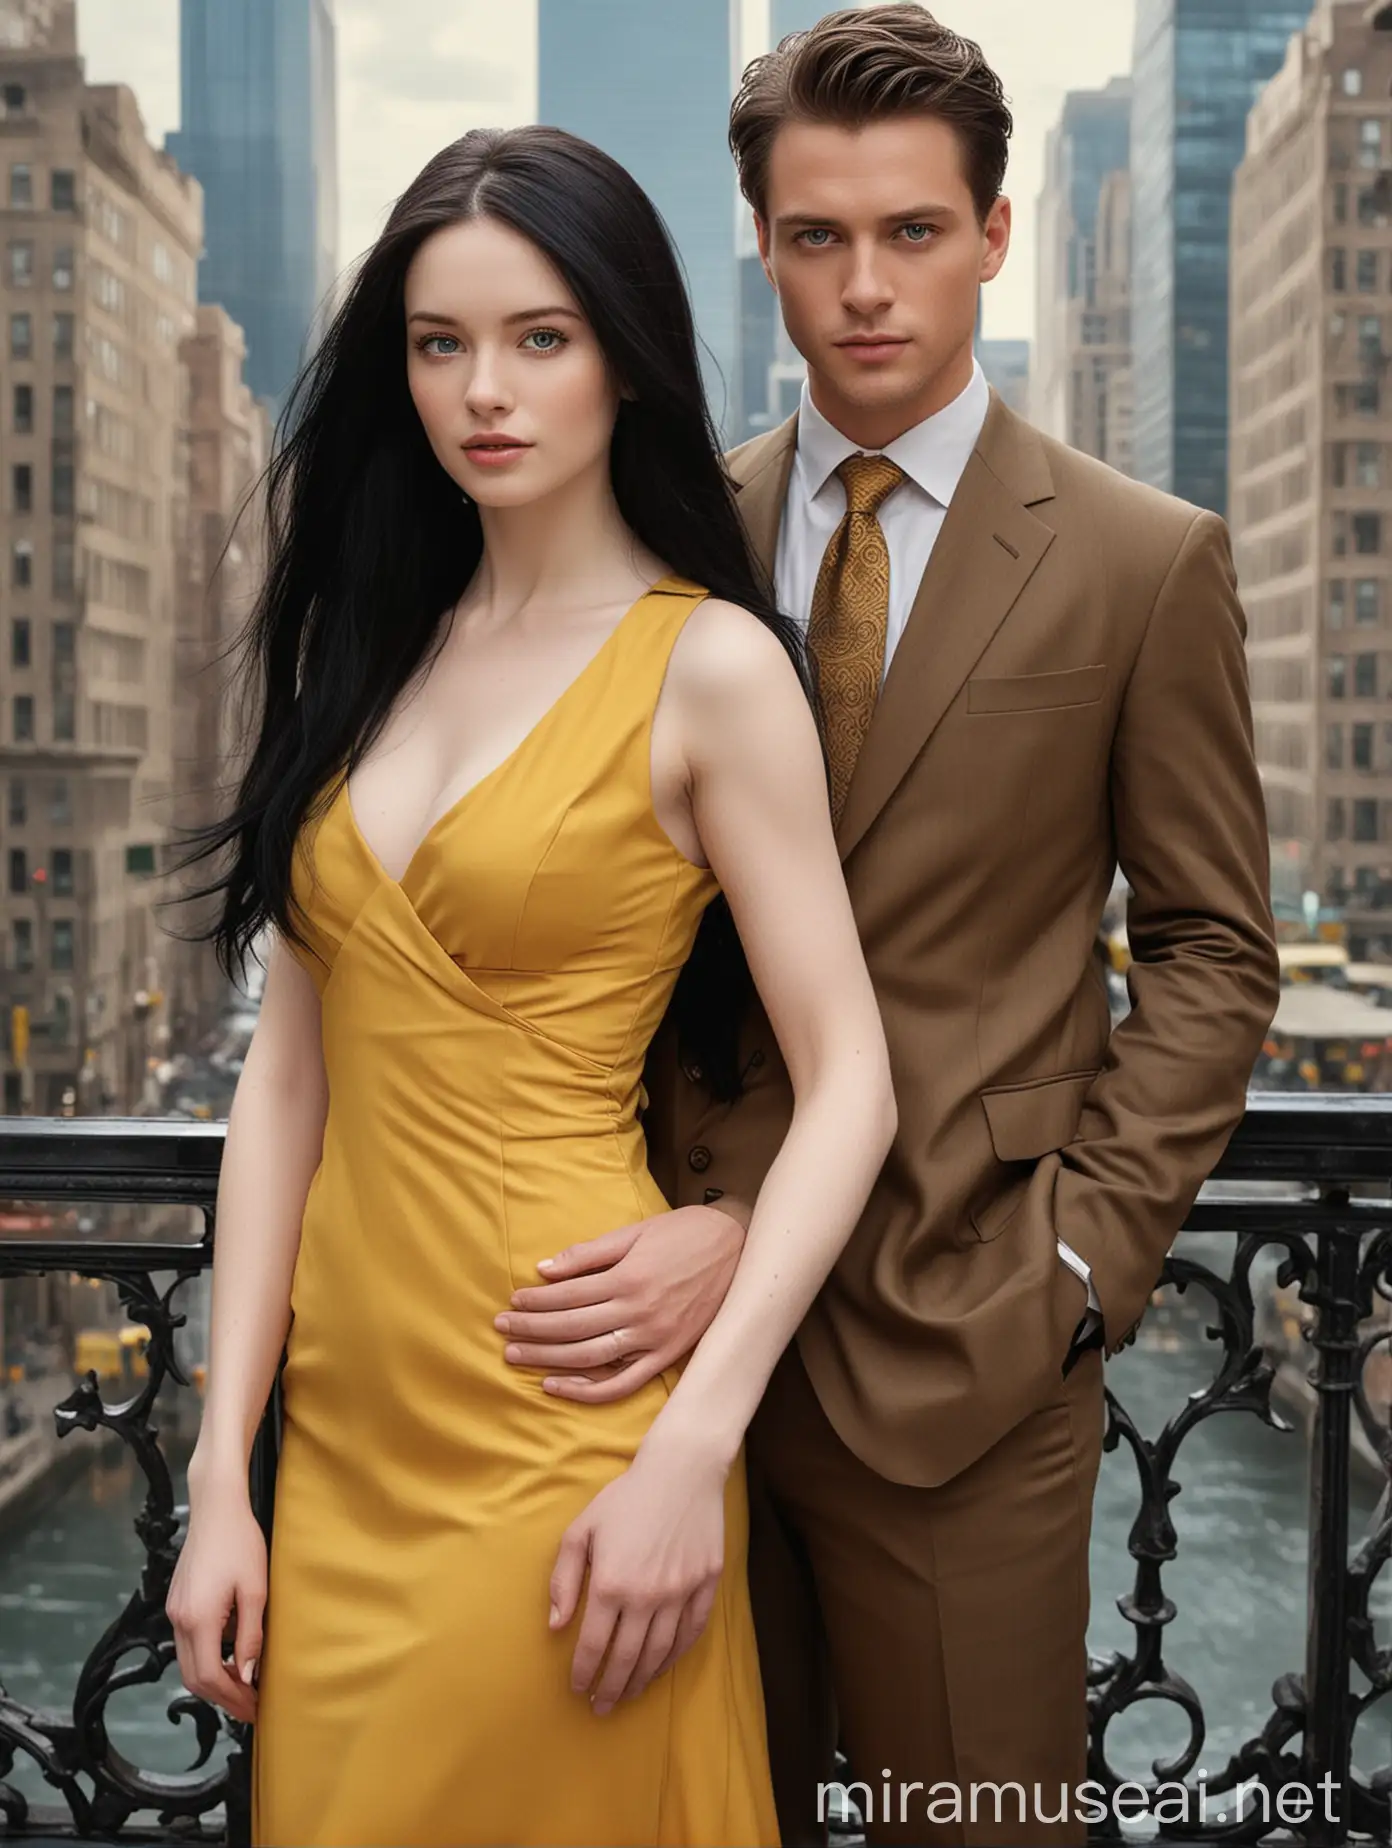 The subject of the portrait is a woman with white, pale skin and a flawless physique and a man that has pale flawless skin. The woman have long, lustrous black hair that shines brightly and the woman is wearing a captivating yellow dress that highlights her hourglass shaped body while the man on her side is wearing business attire and the man should have short regulation-cut brown hair. The image should prominently highlight their blue eyes while ensuring the eye and hair color remain distinct. The background should be tall buildings.